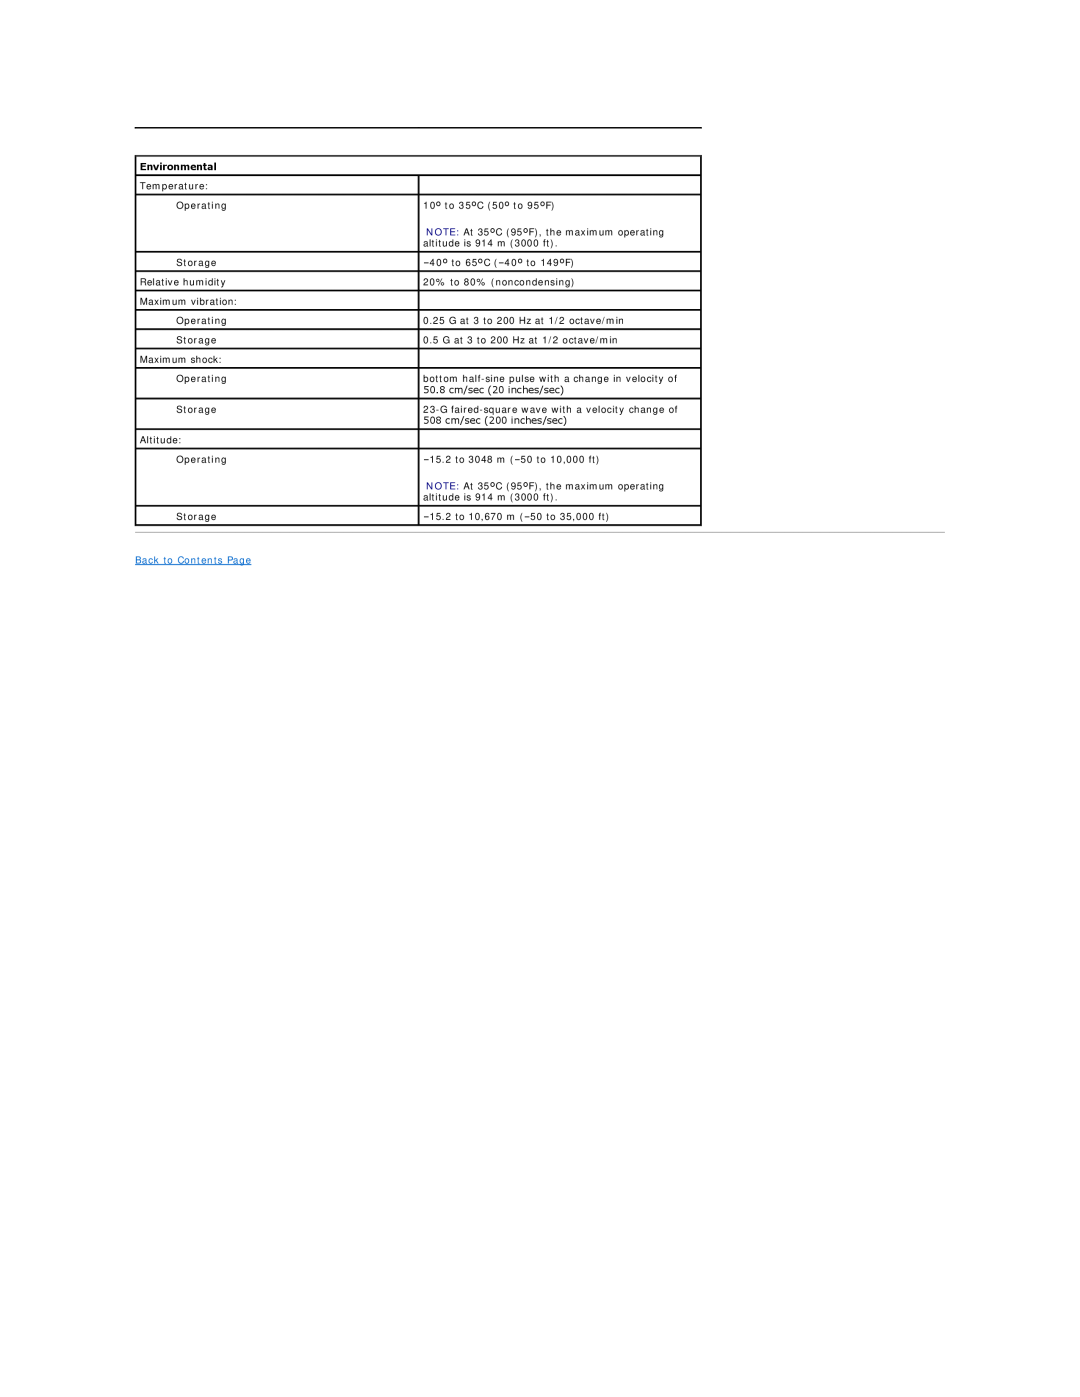 Dell 8300 technical specifications Environmental, Back to Contents Page 